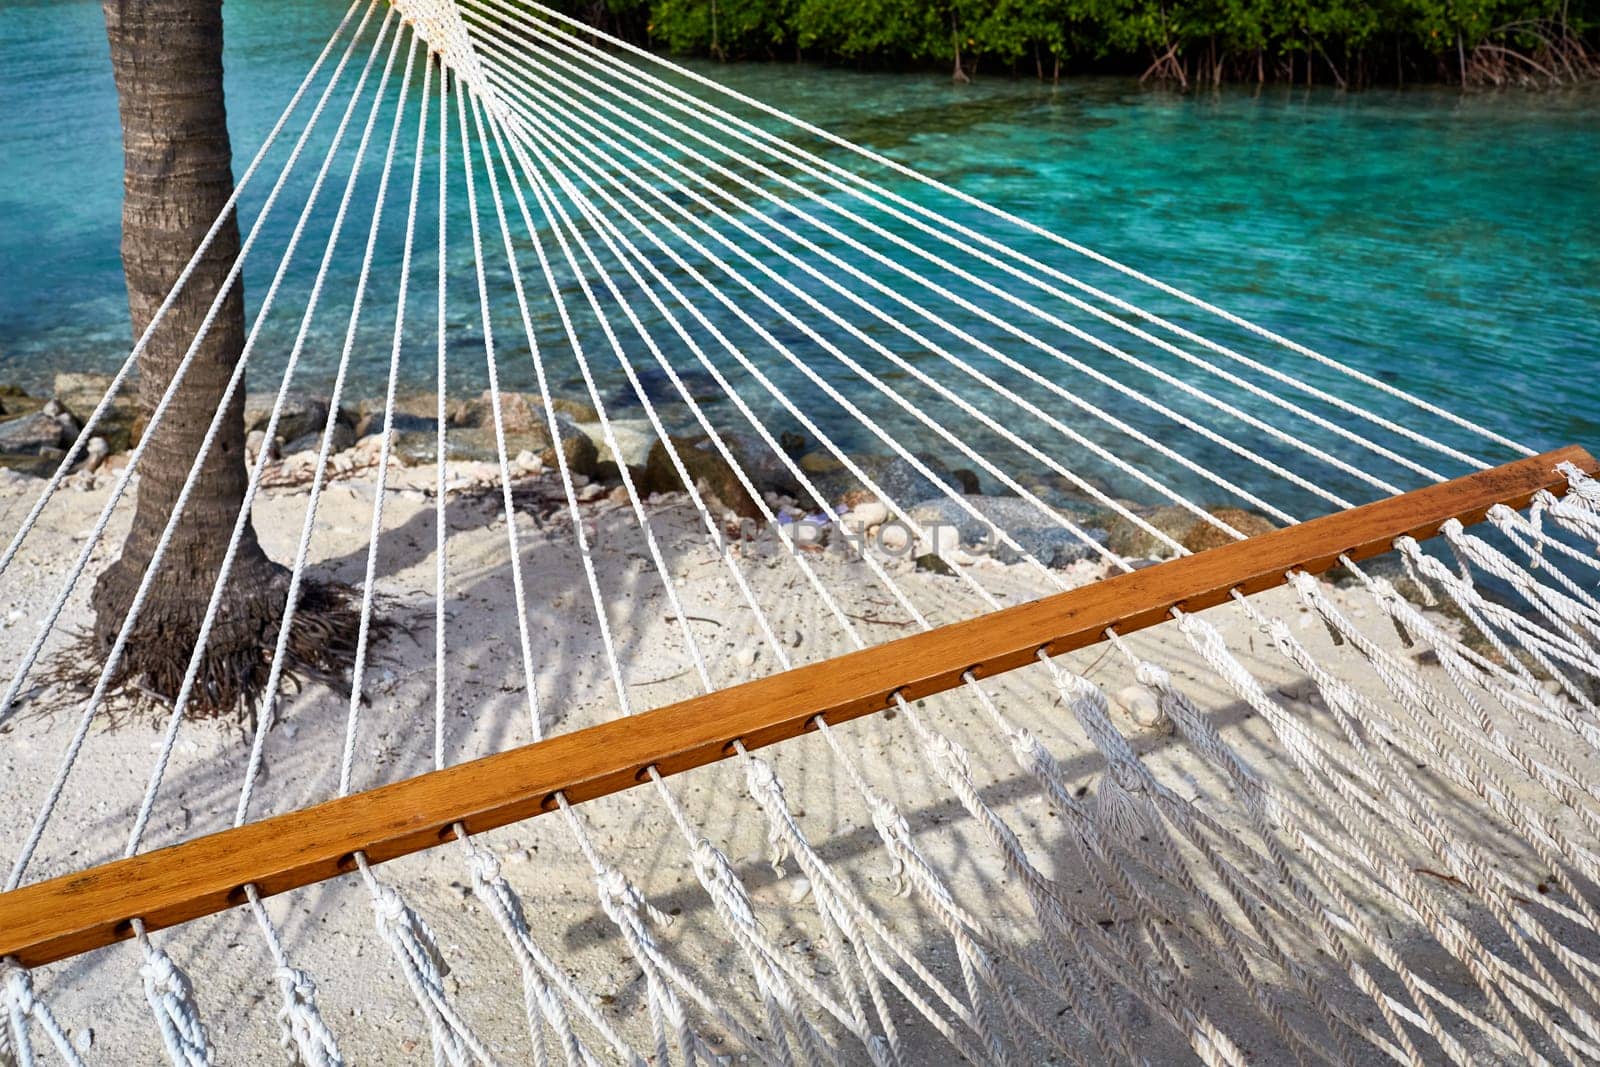 Hammock image from a island hut in carribean.